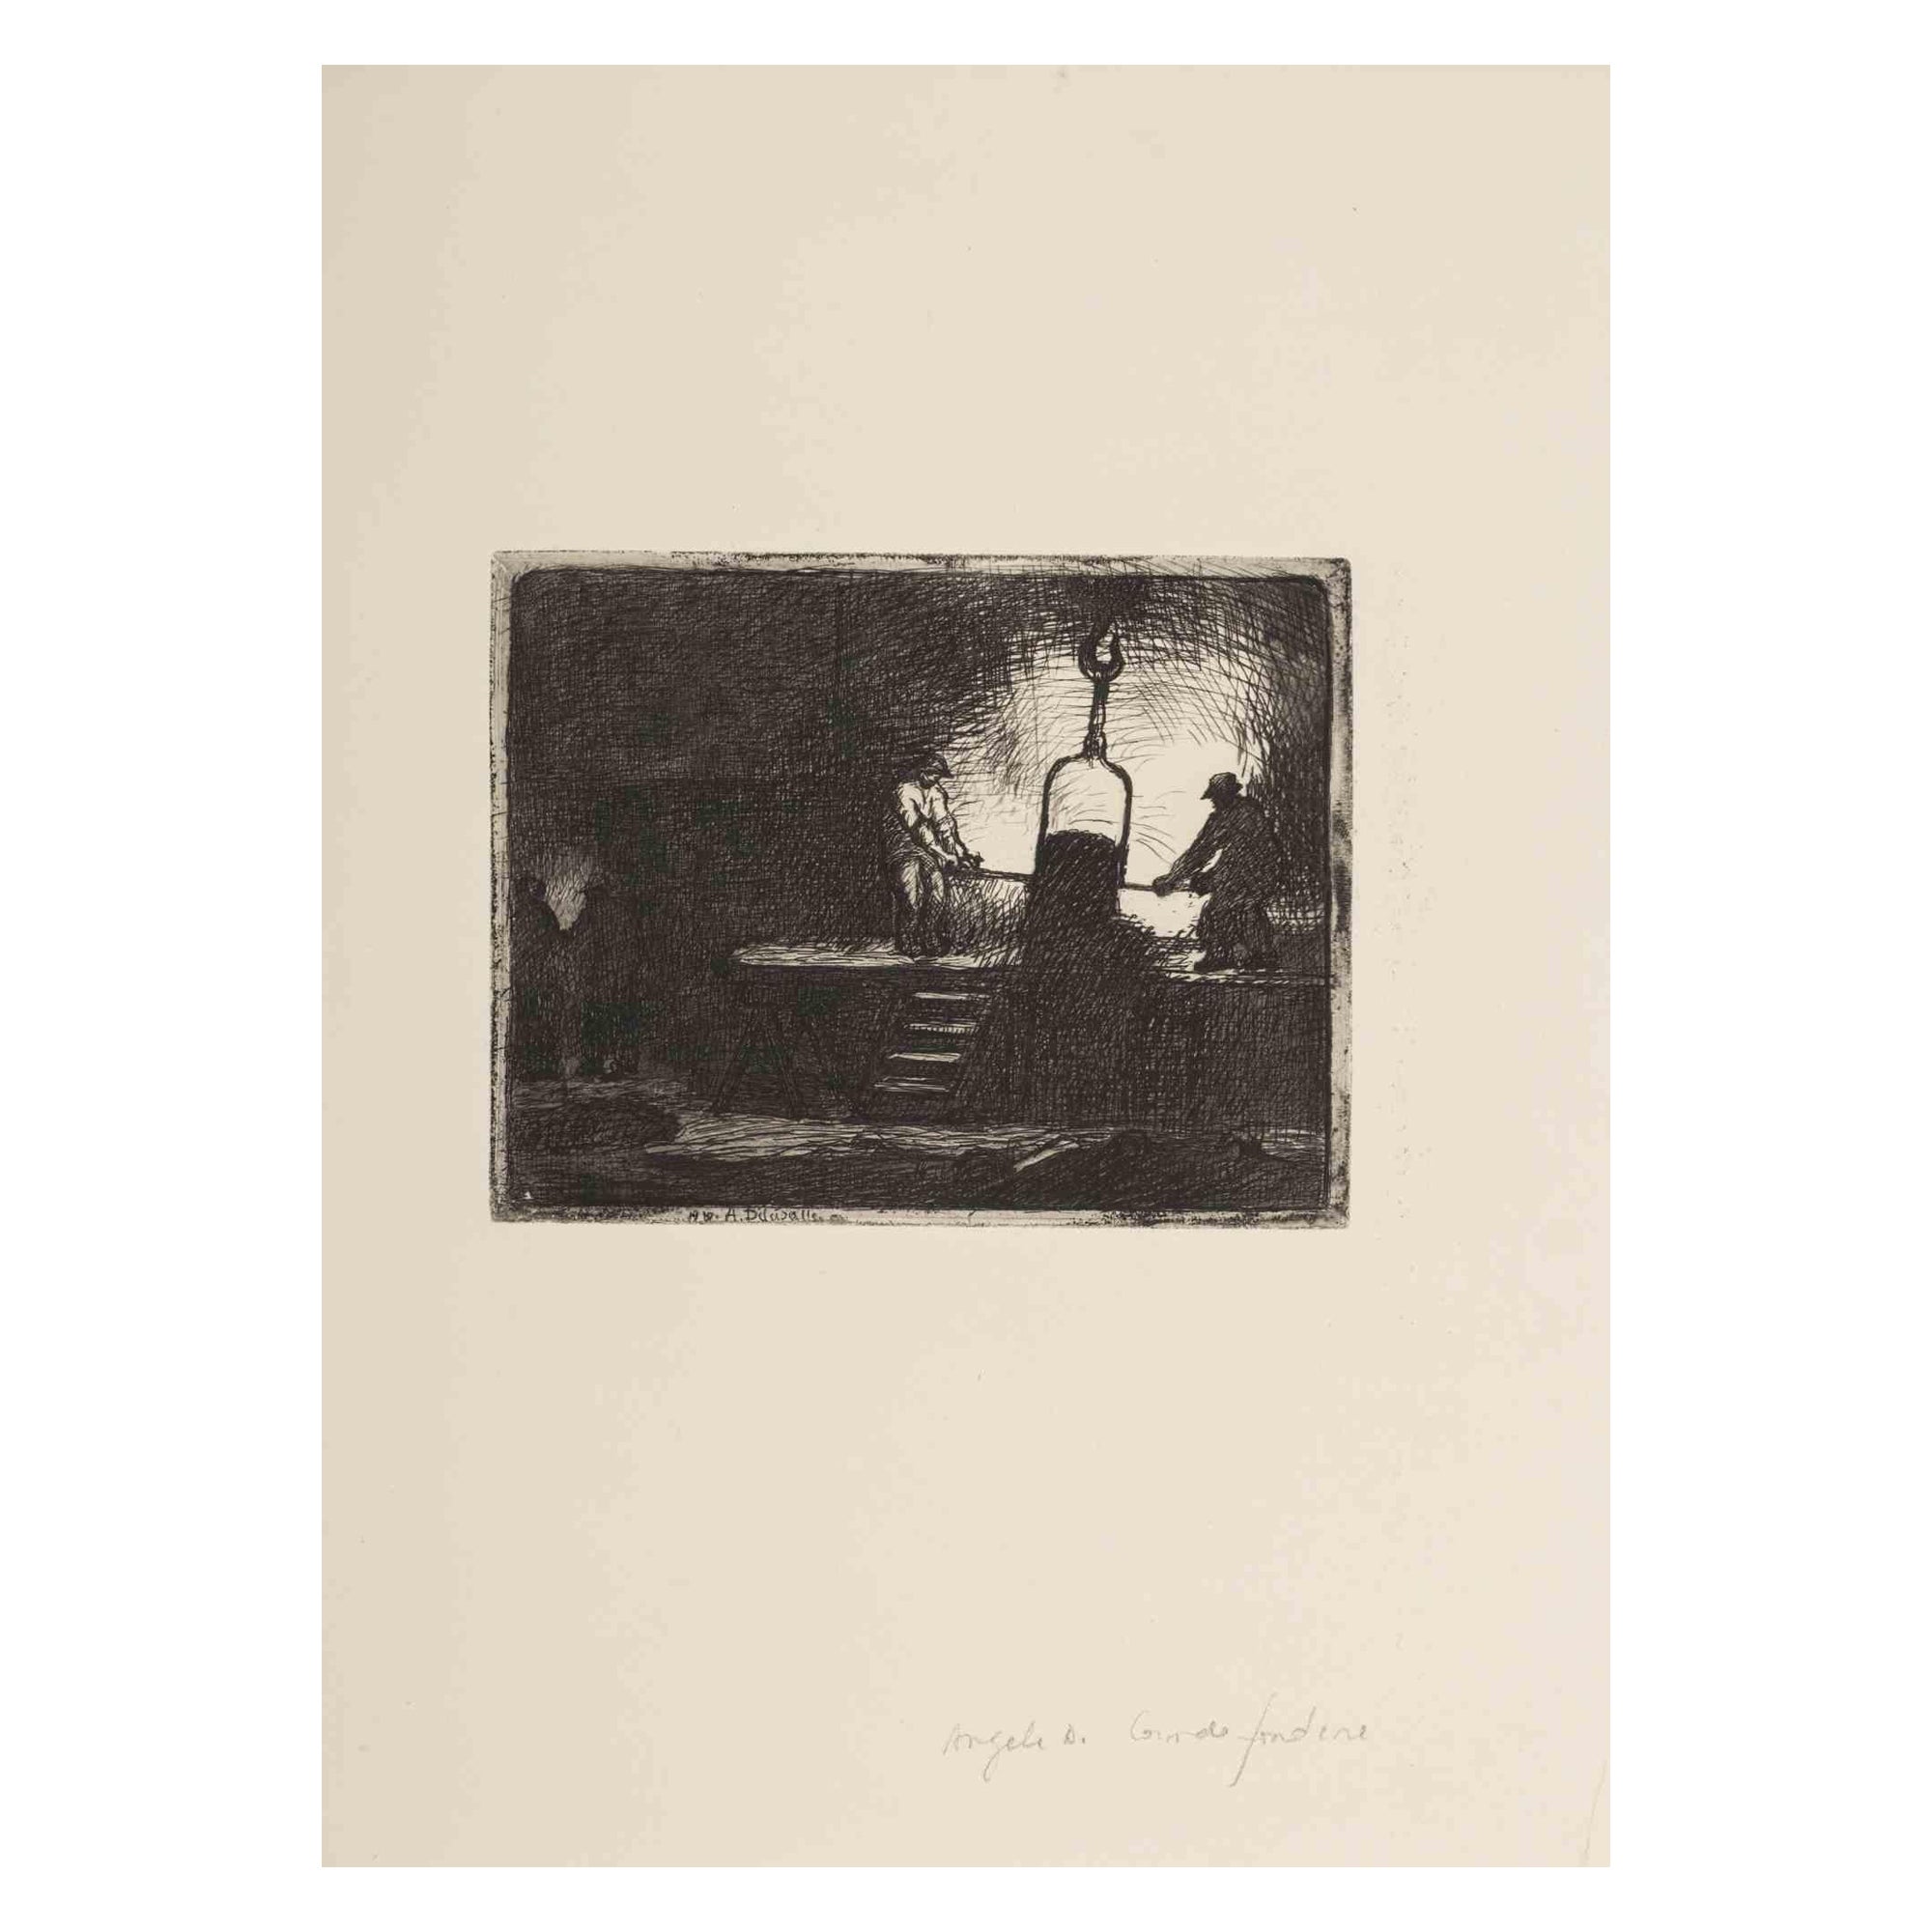 Angèle Delasalle Landscape Print - Working - Original Etching by A. Delasalle - Mid-20th Century